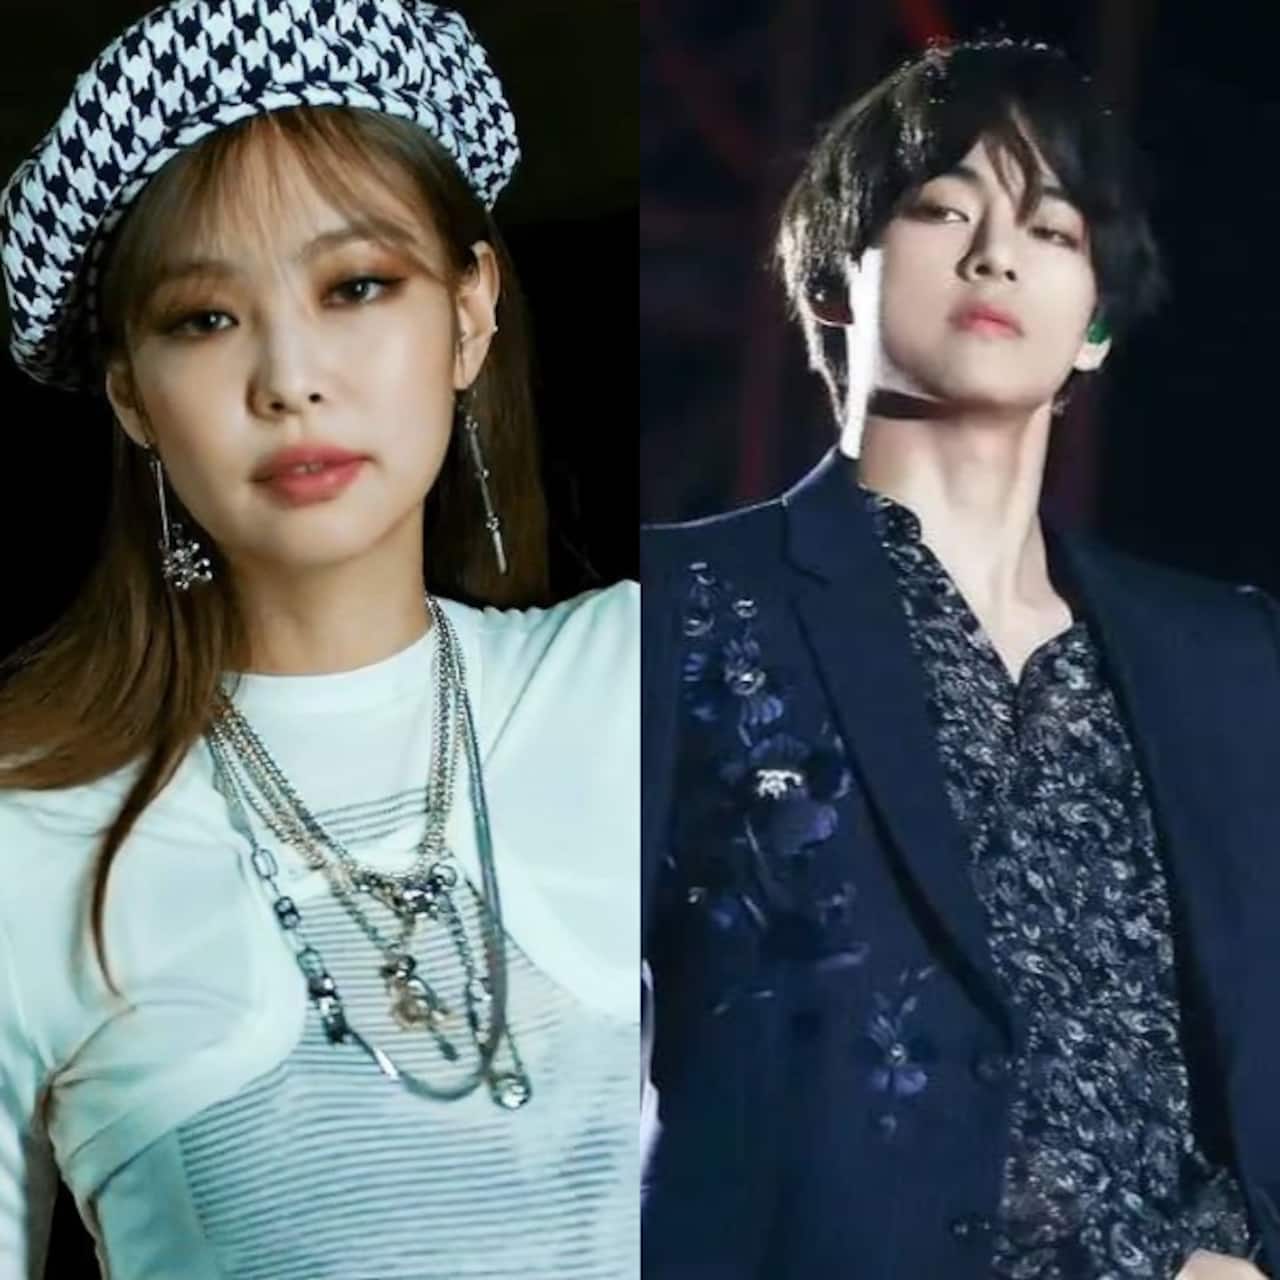 BTS’ Kim Taehyung-Jennie dating rumours: BLINKS get restless as 15 people form a group to ‘politely’ approach the Blackpink rapper